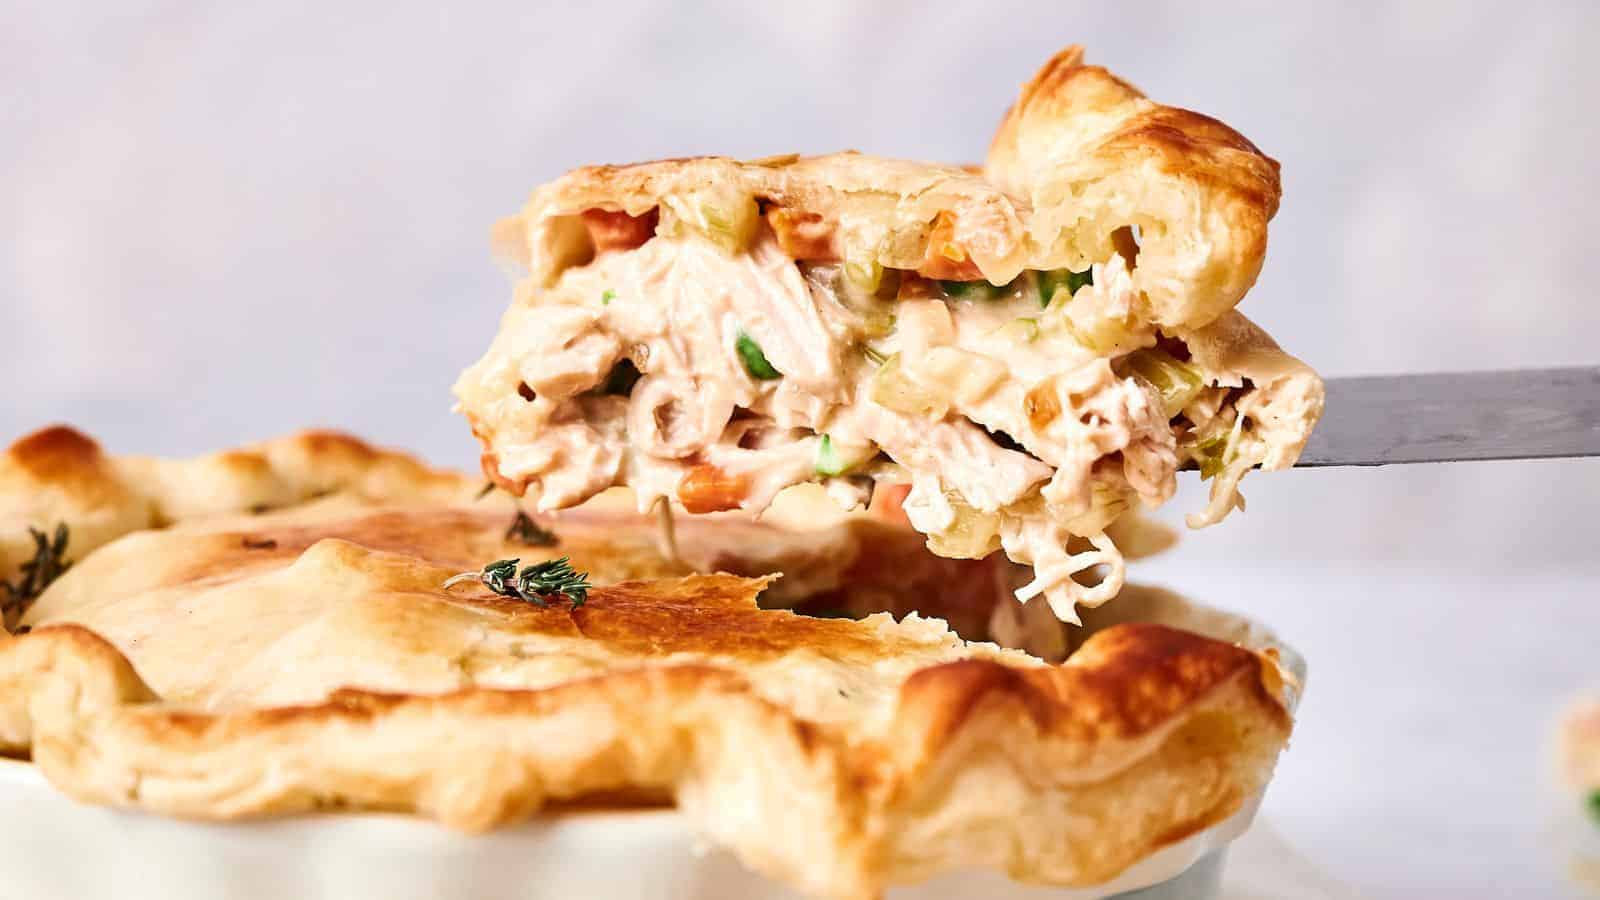 A slice of chicken pot pie being lifted, showing its creamy filling with chunks of chicken and vegetables, garnished with thyme.